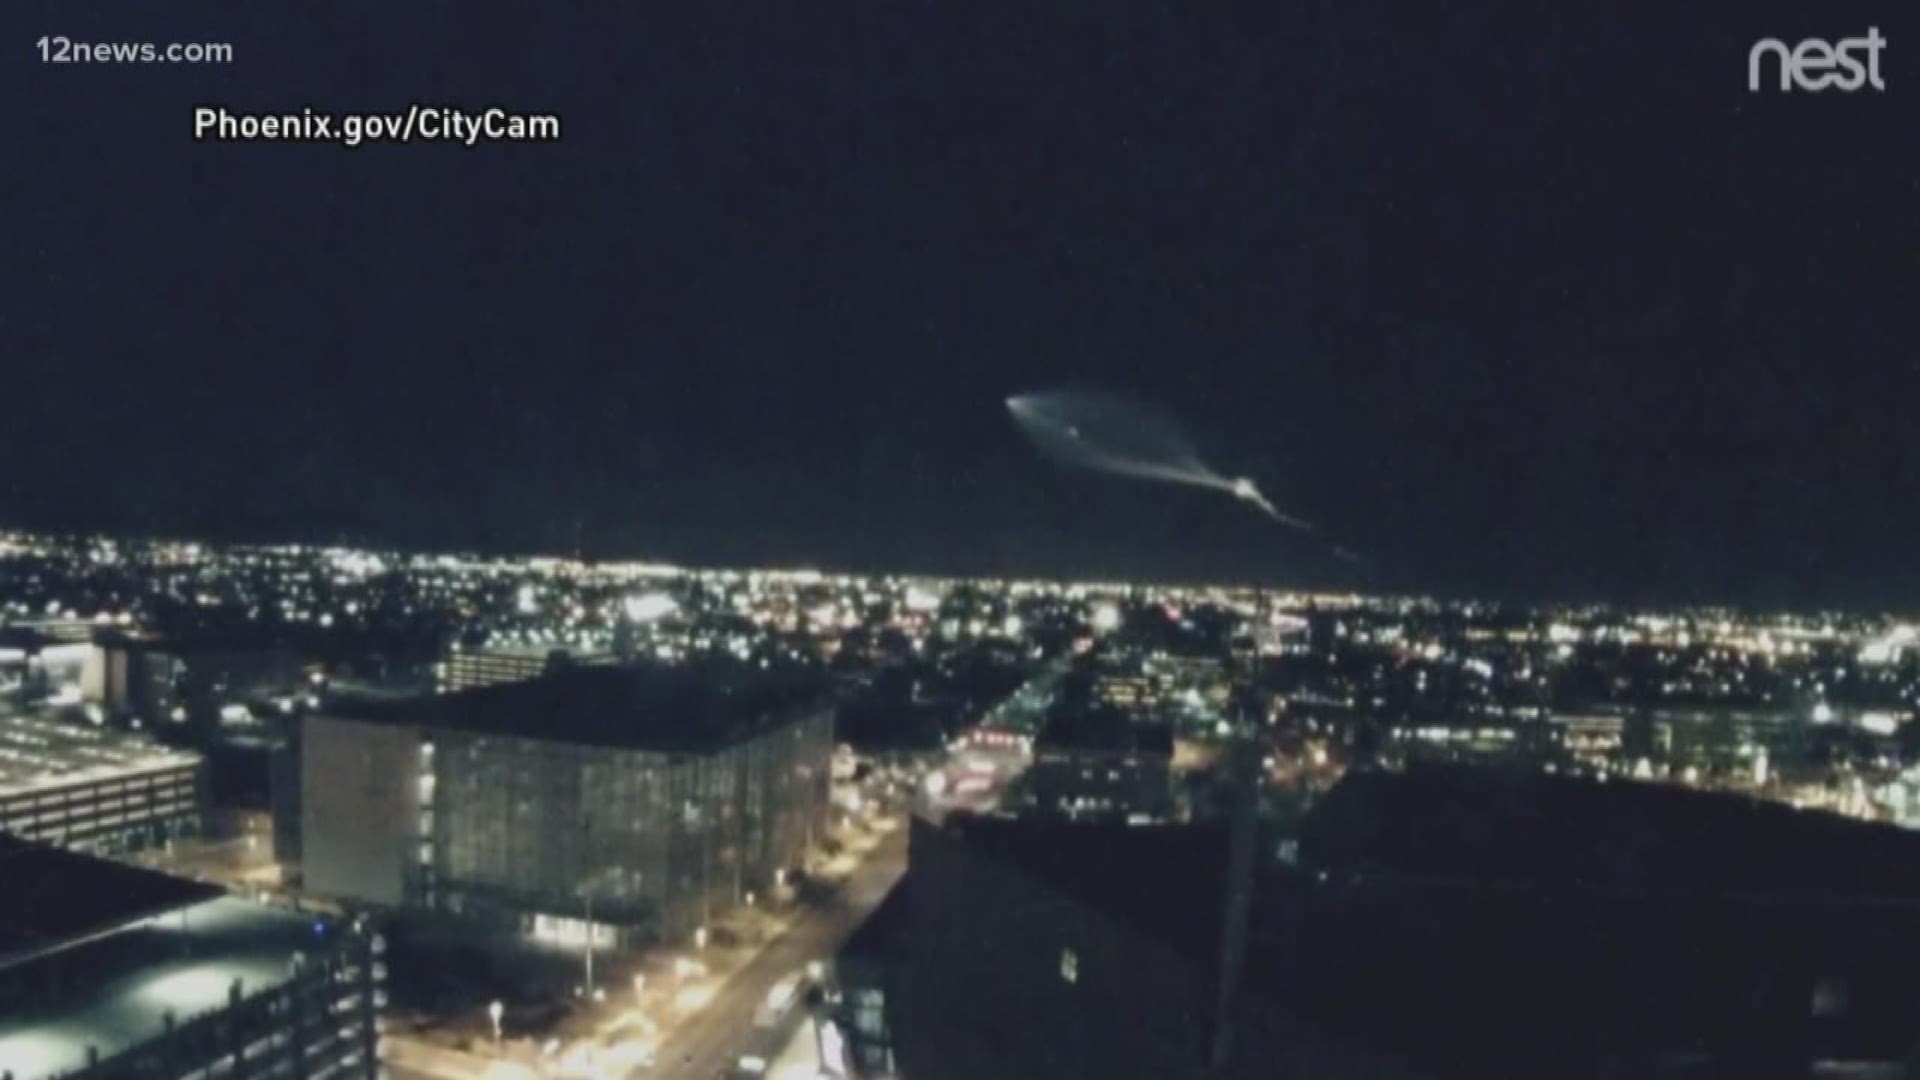 A SpaceX rocket and vapor trail was spotted in the skies over Phoenix Friday night.